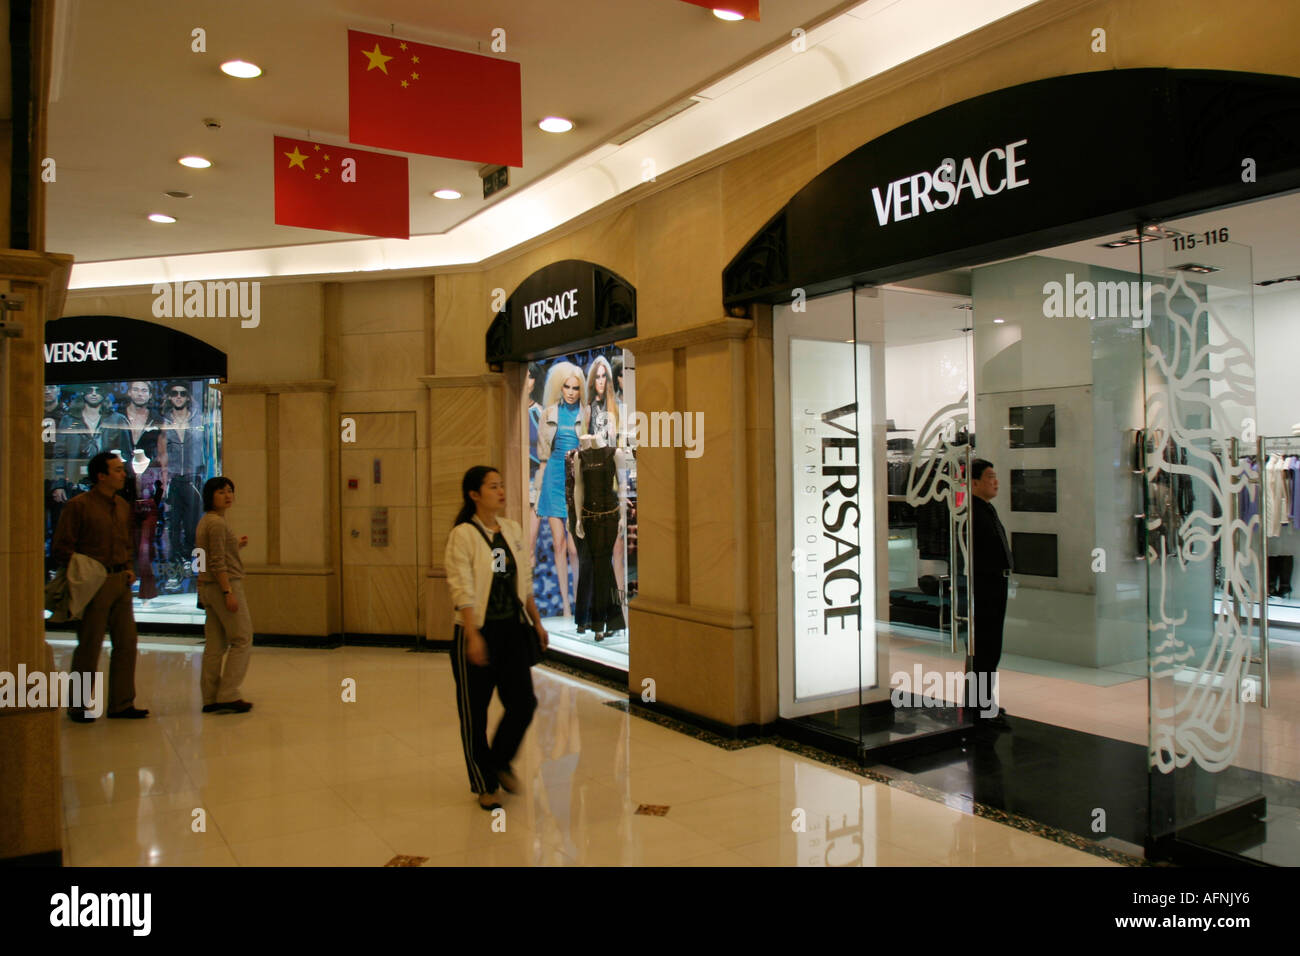 Versace fashion outlet Stock Photo - Alamy